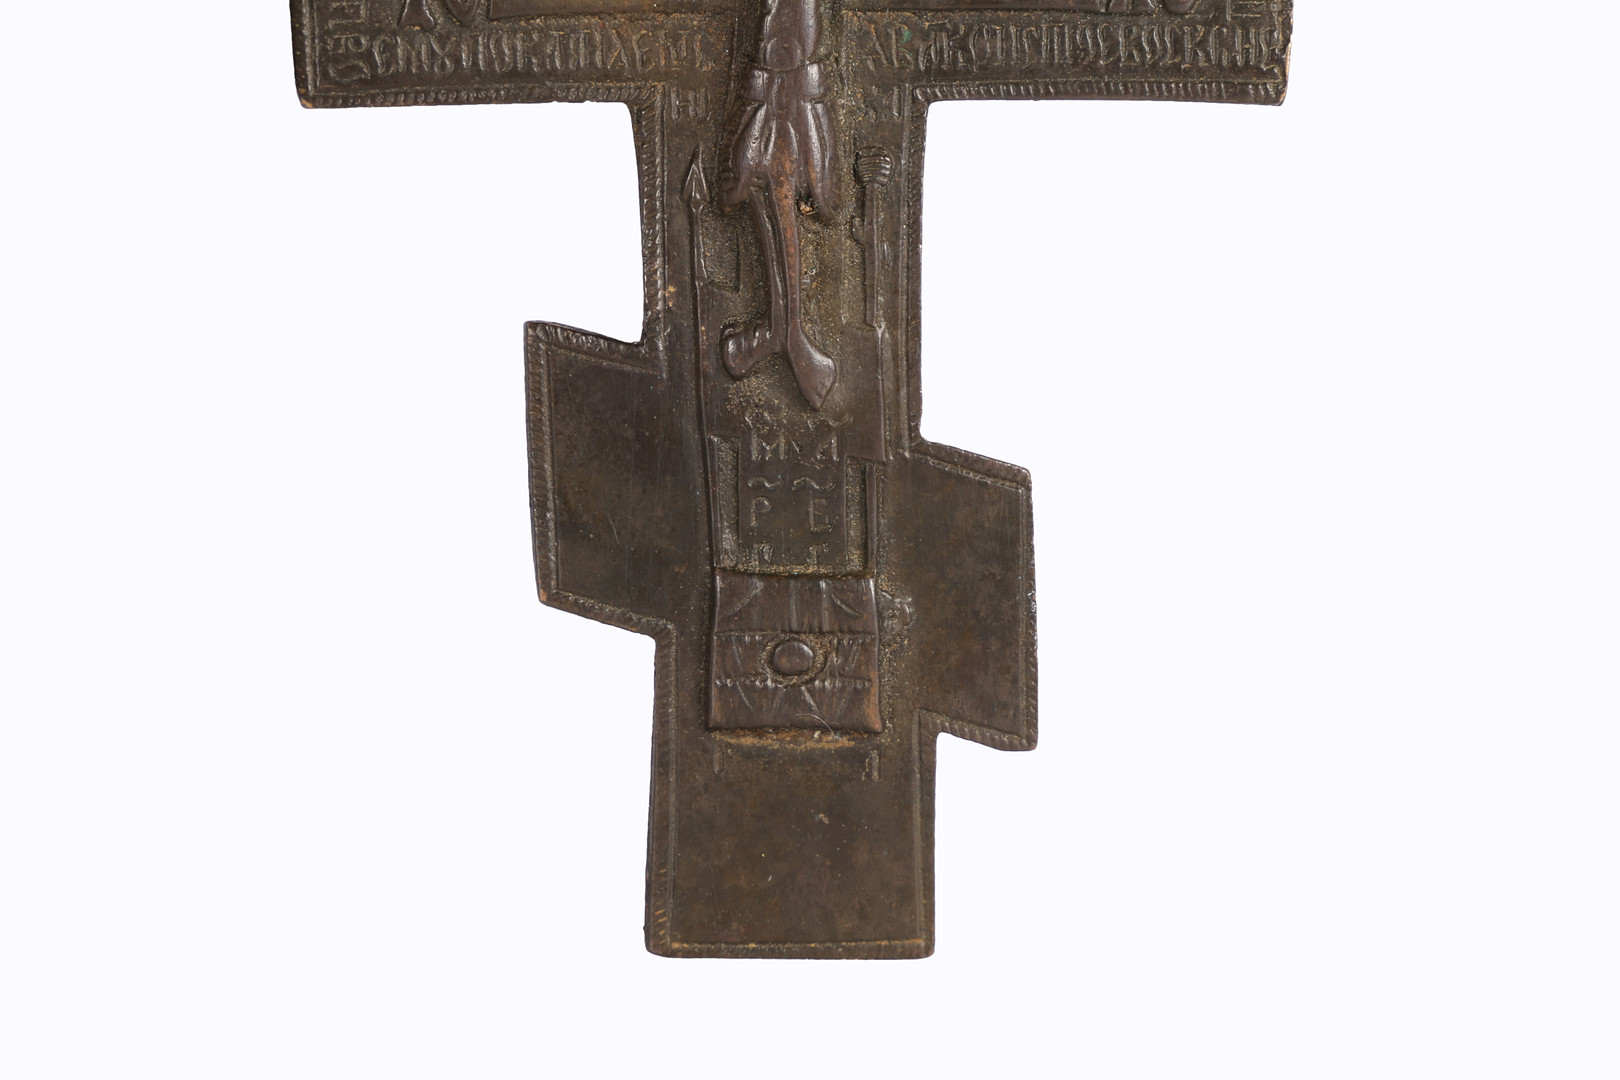 TWO 19TH CENTURY RUSSIAN ORTHODOX BRONZE ICONS. - Image 9 of 10